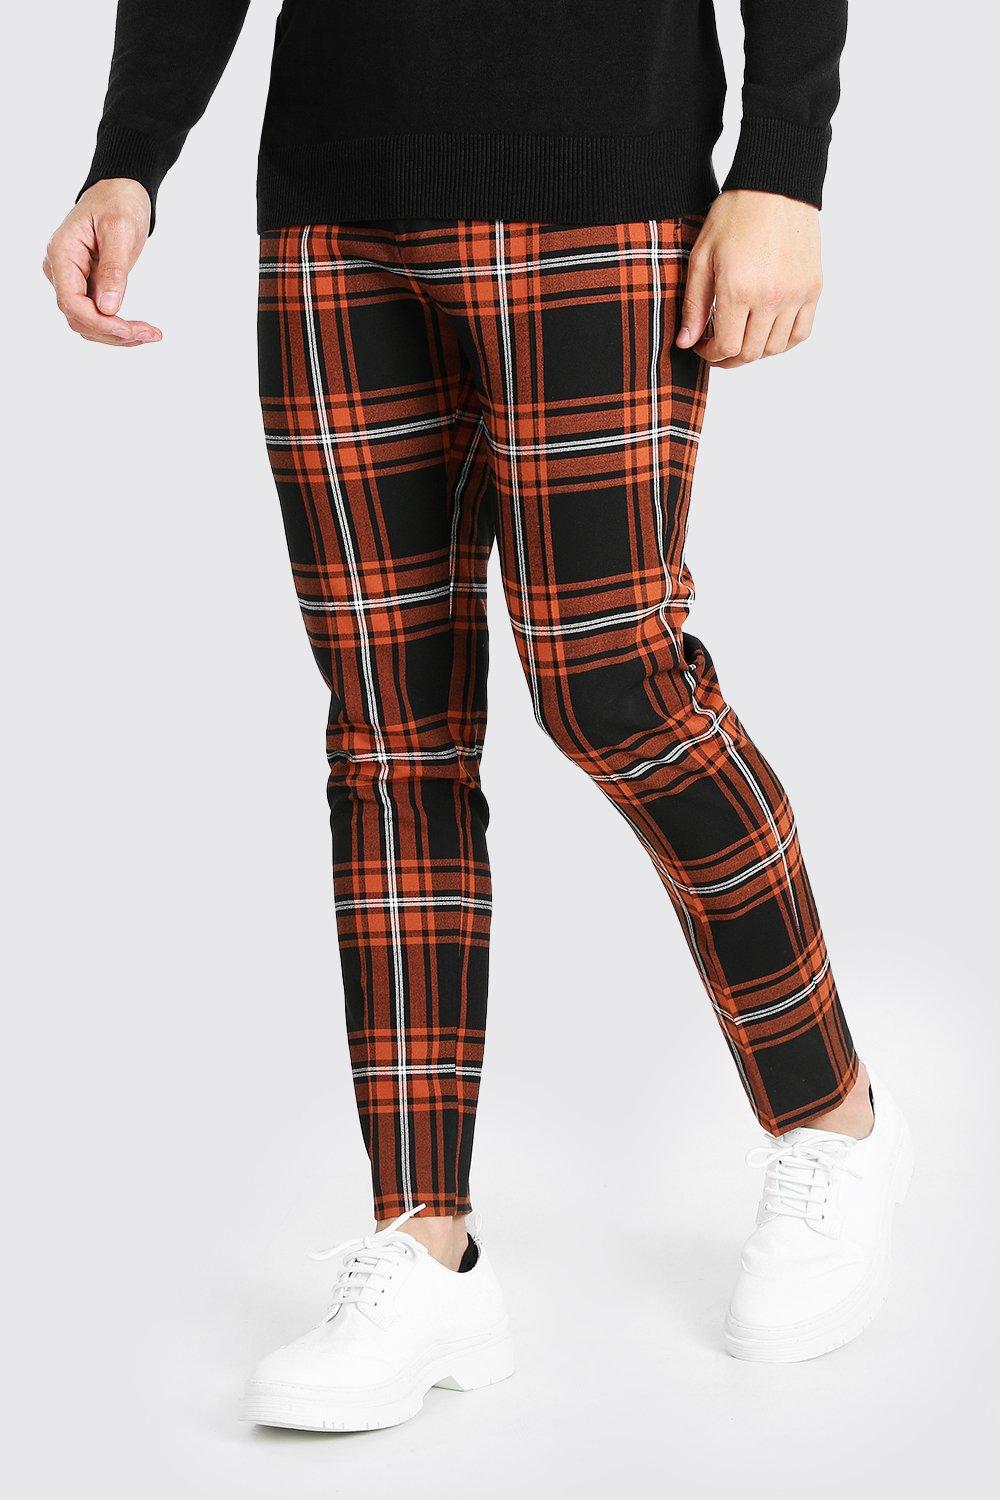 red plaid jeans mens